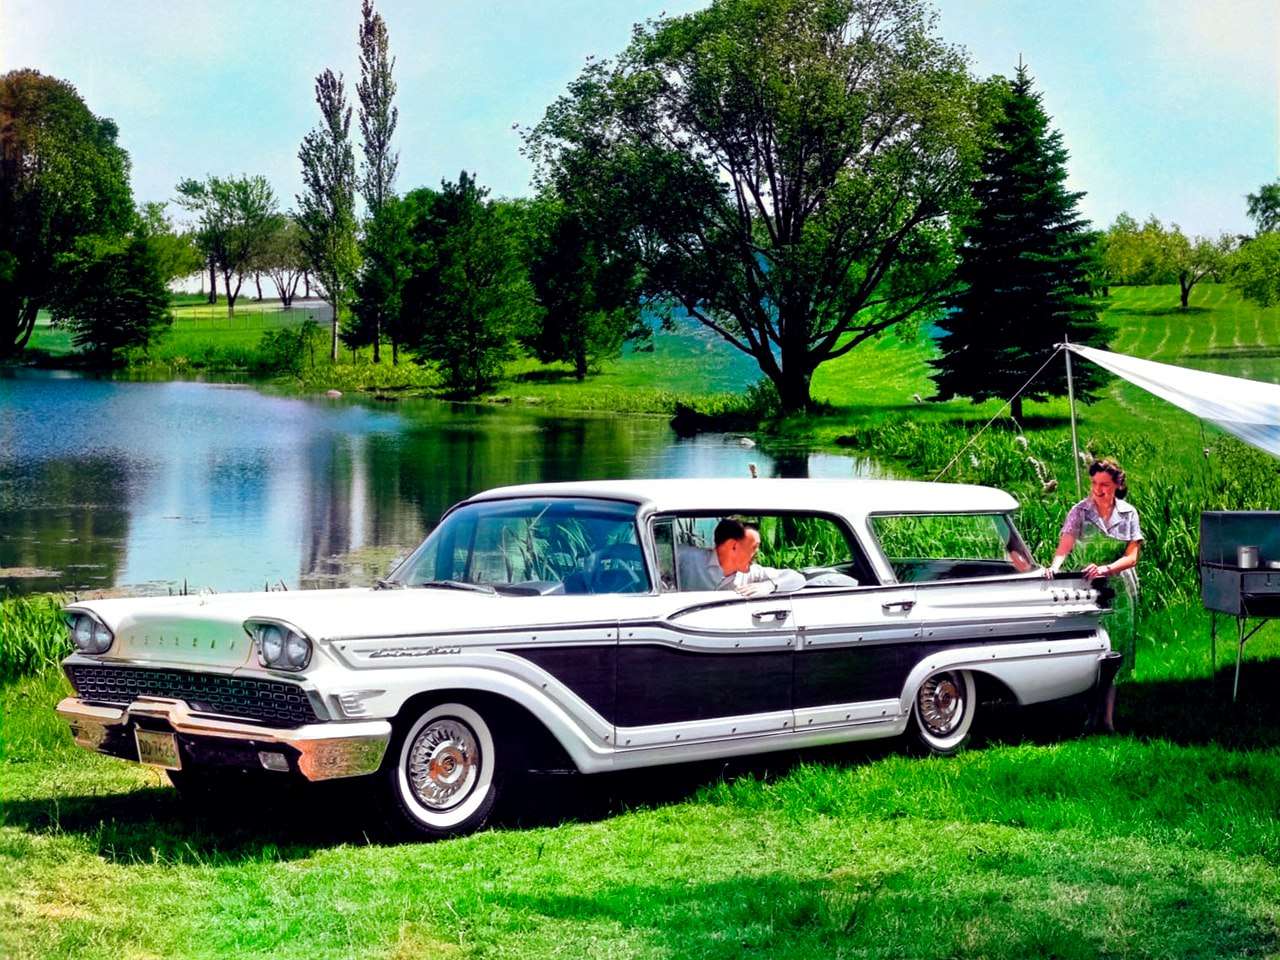 1959 Mercury Country Cruiser Colony Park online puzzle